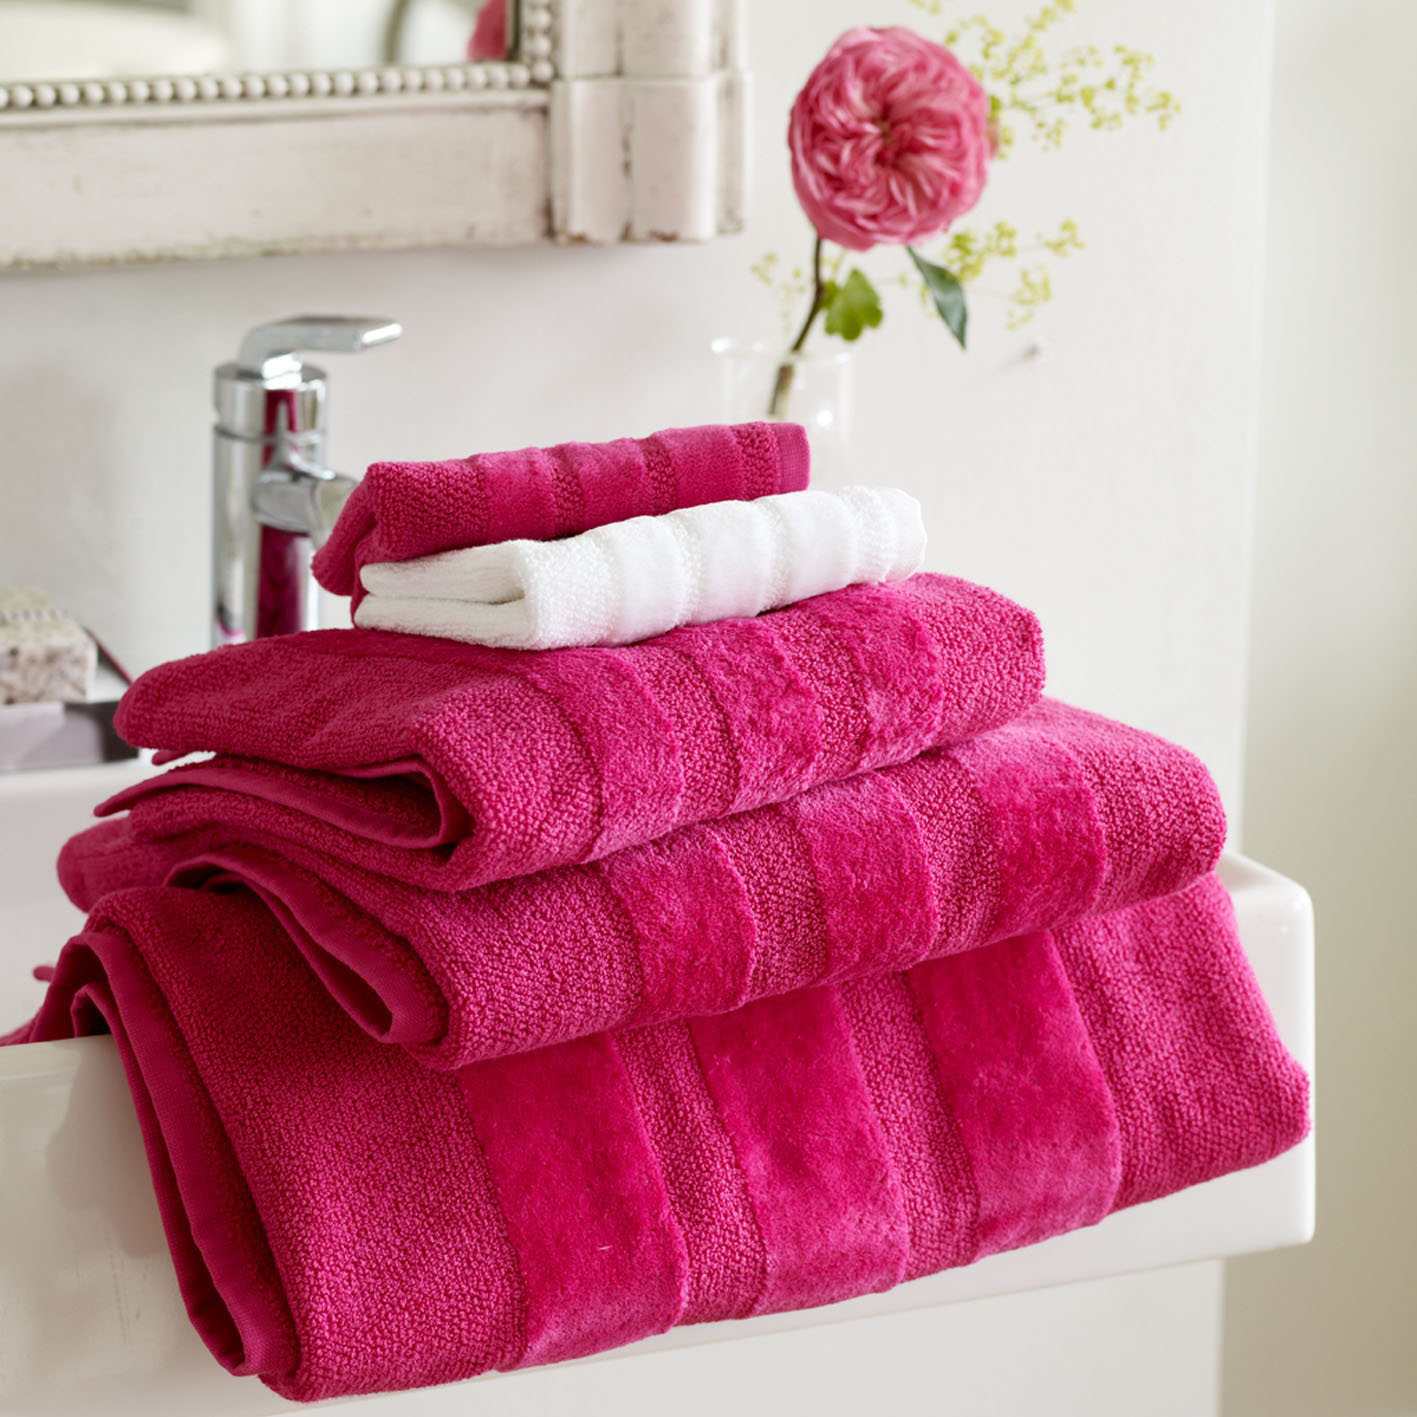 Hard Goods Towels and Robes Buying Agency in India